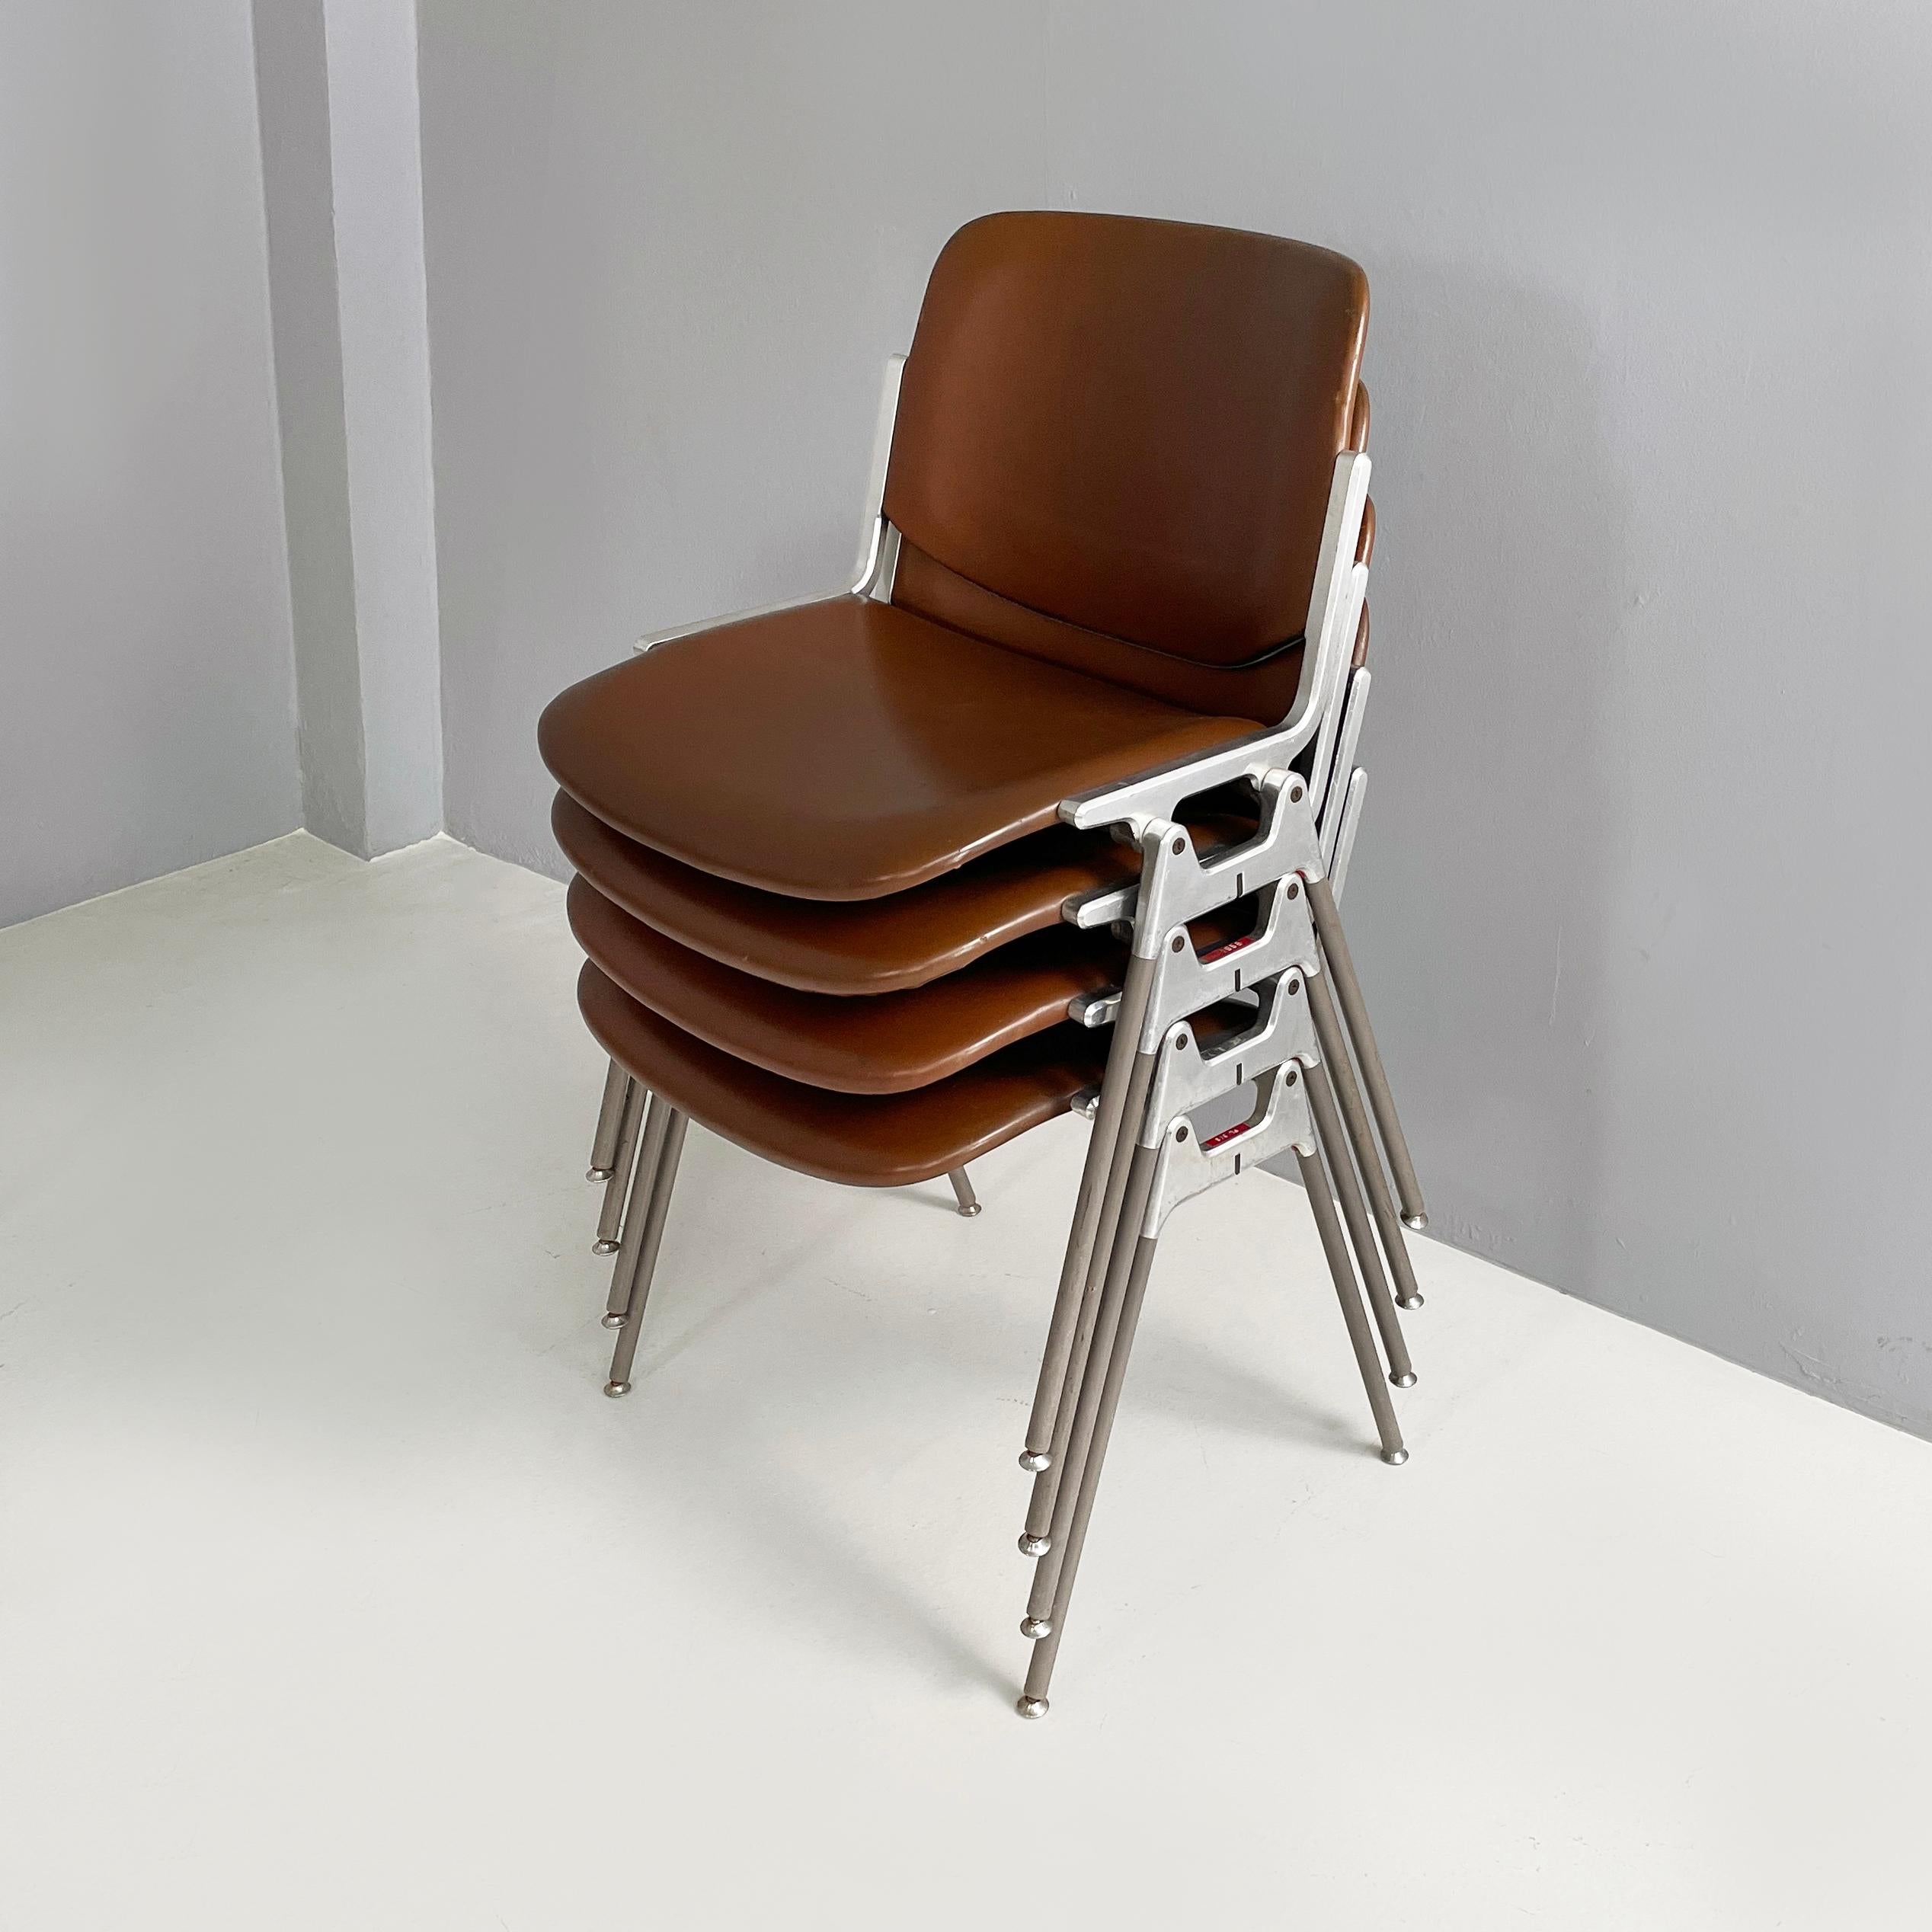 Italian mid-century modern Chairs DSC by Giancarlo Piretti for Anonima Castelli, 1970s
Set of iconic and fantastic 8 chairs mod. DSC padded and covered in dark brown leather. The seat and backrest are rectangular with rounded corners. The sturdy